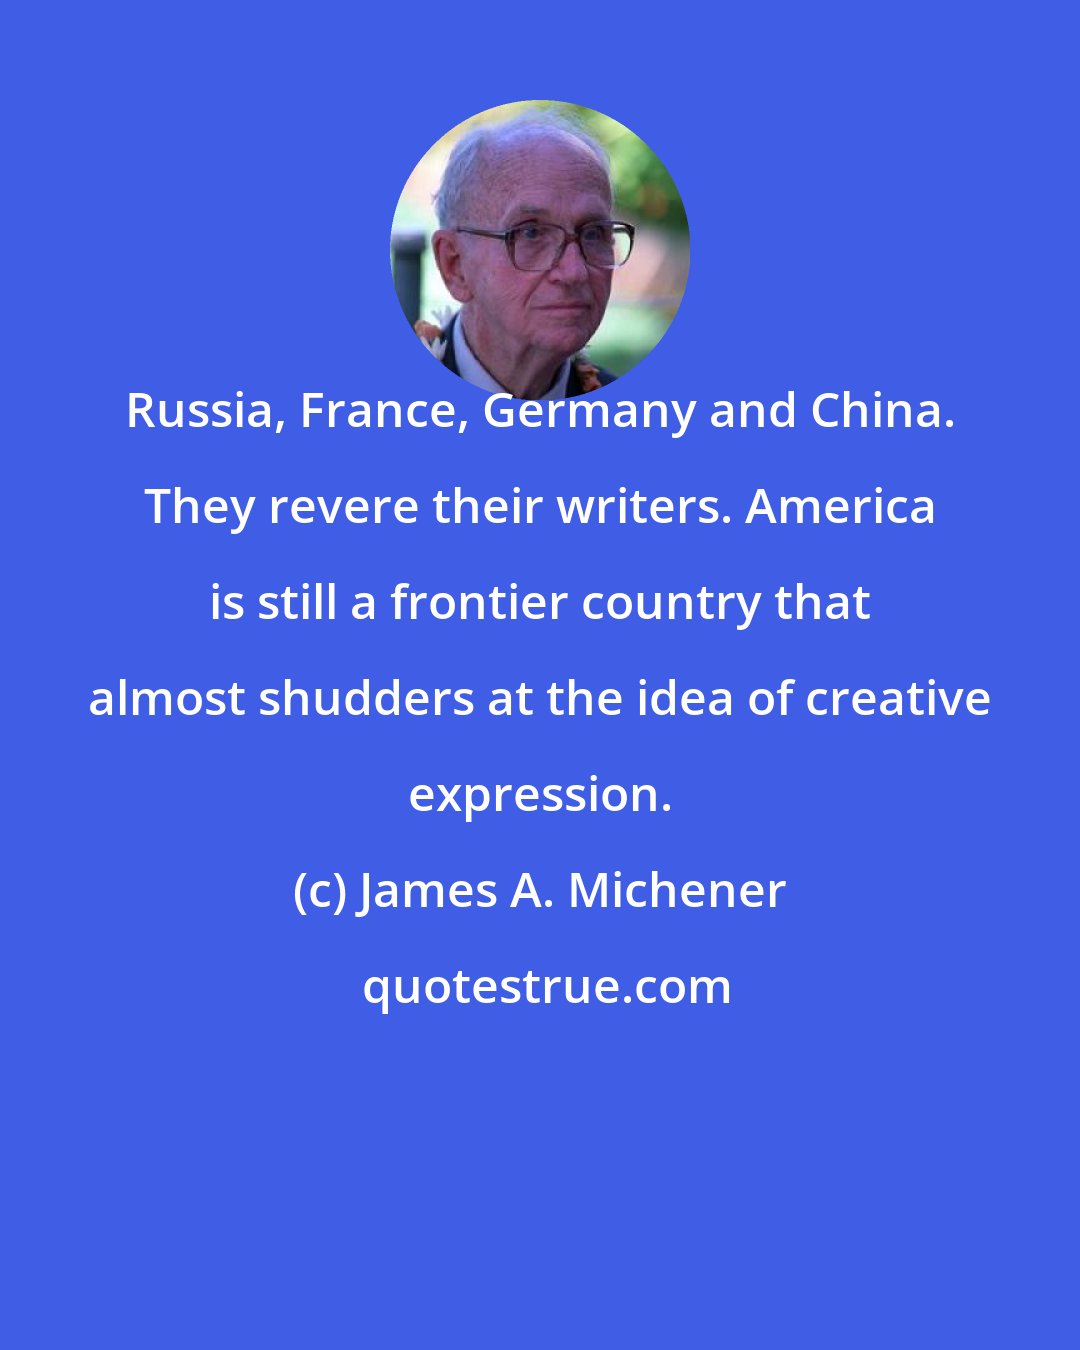 James A. Michener: Russia, France, Germany and China. They revere their writers. America is still a frontier country that almost shudders at the idea of creative expression.